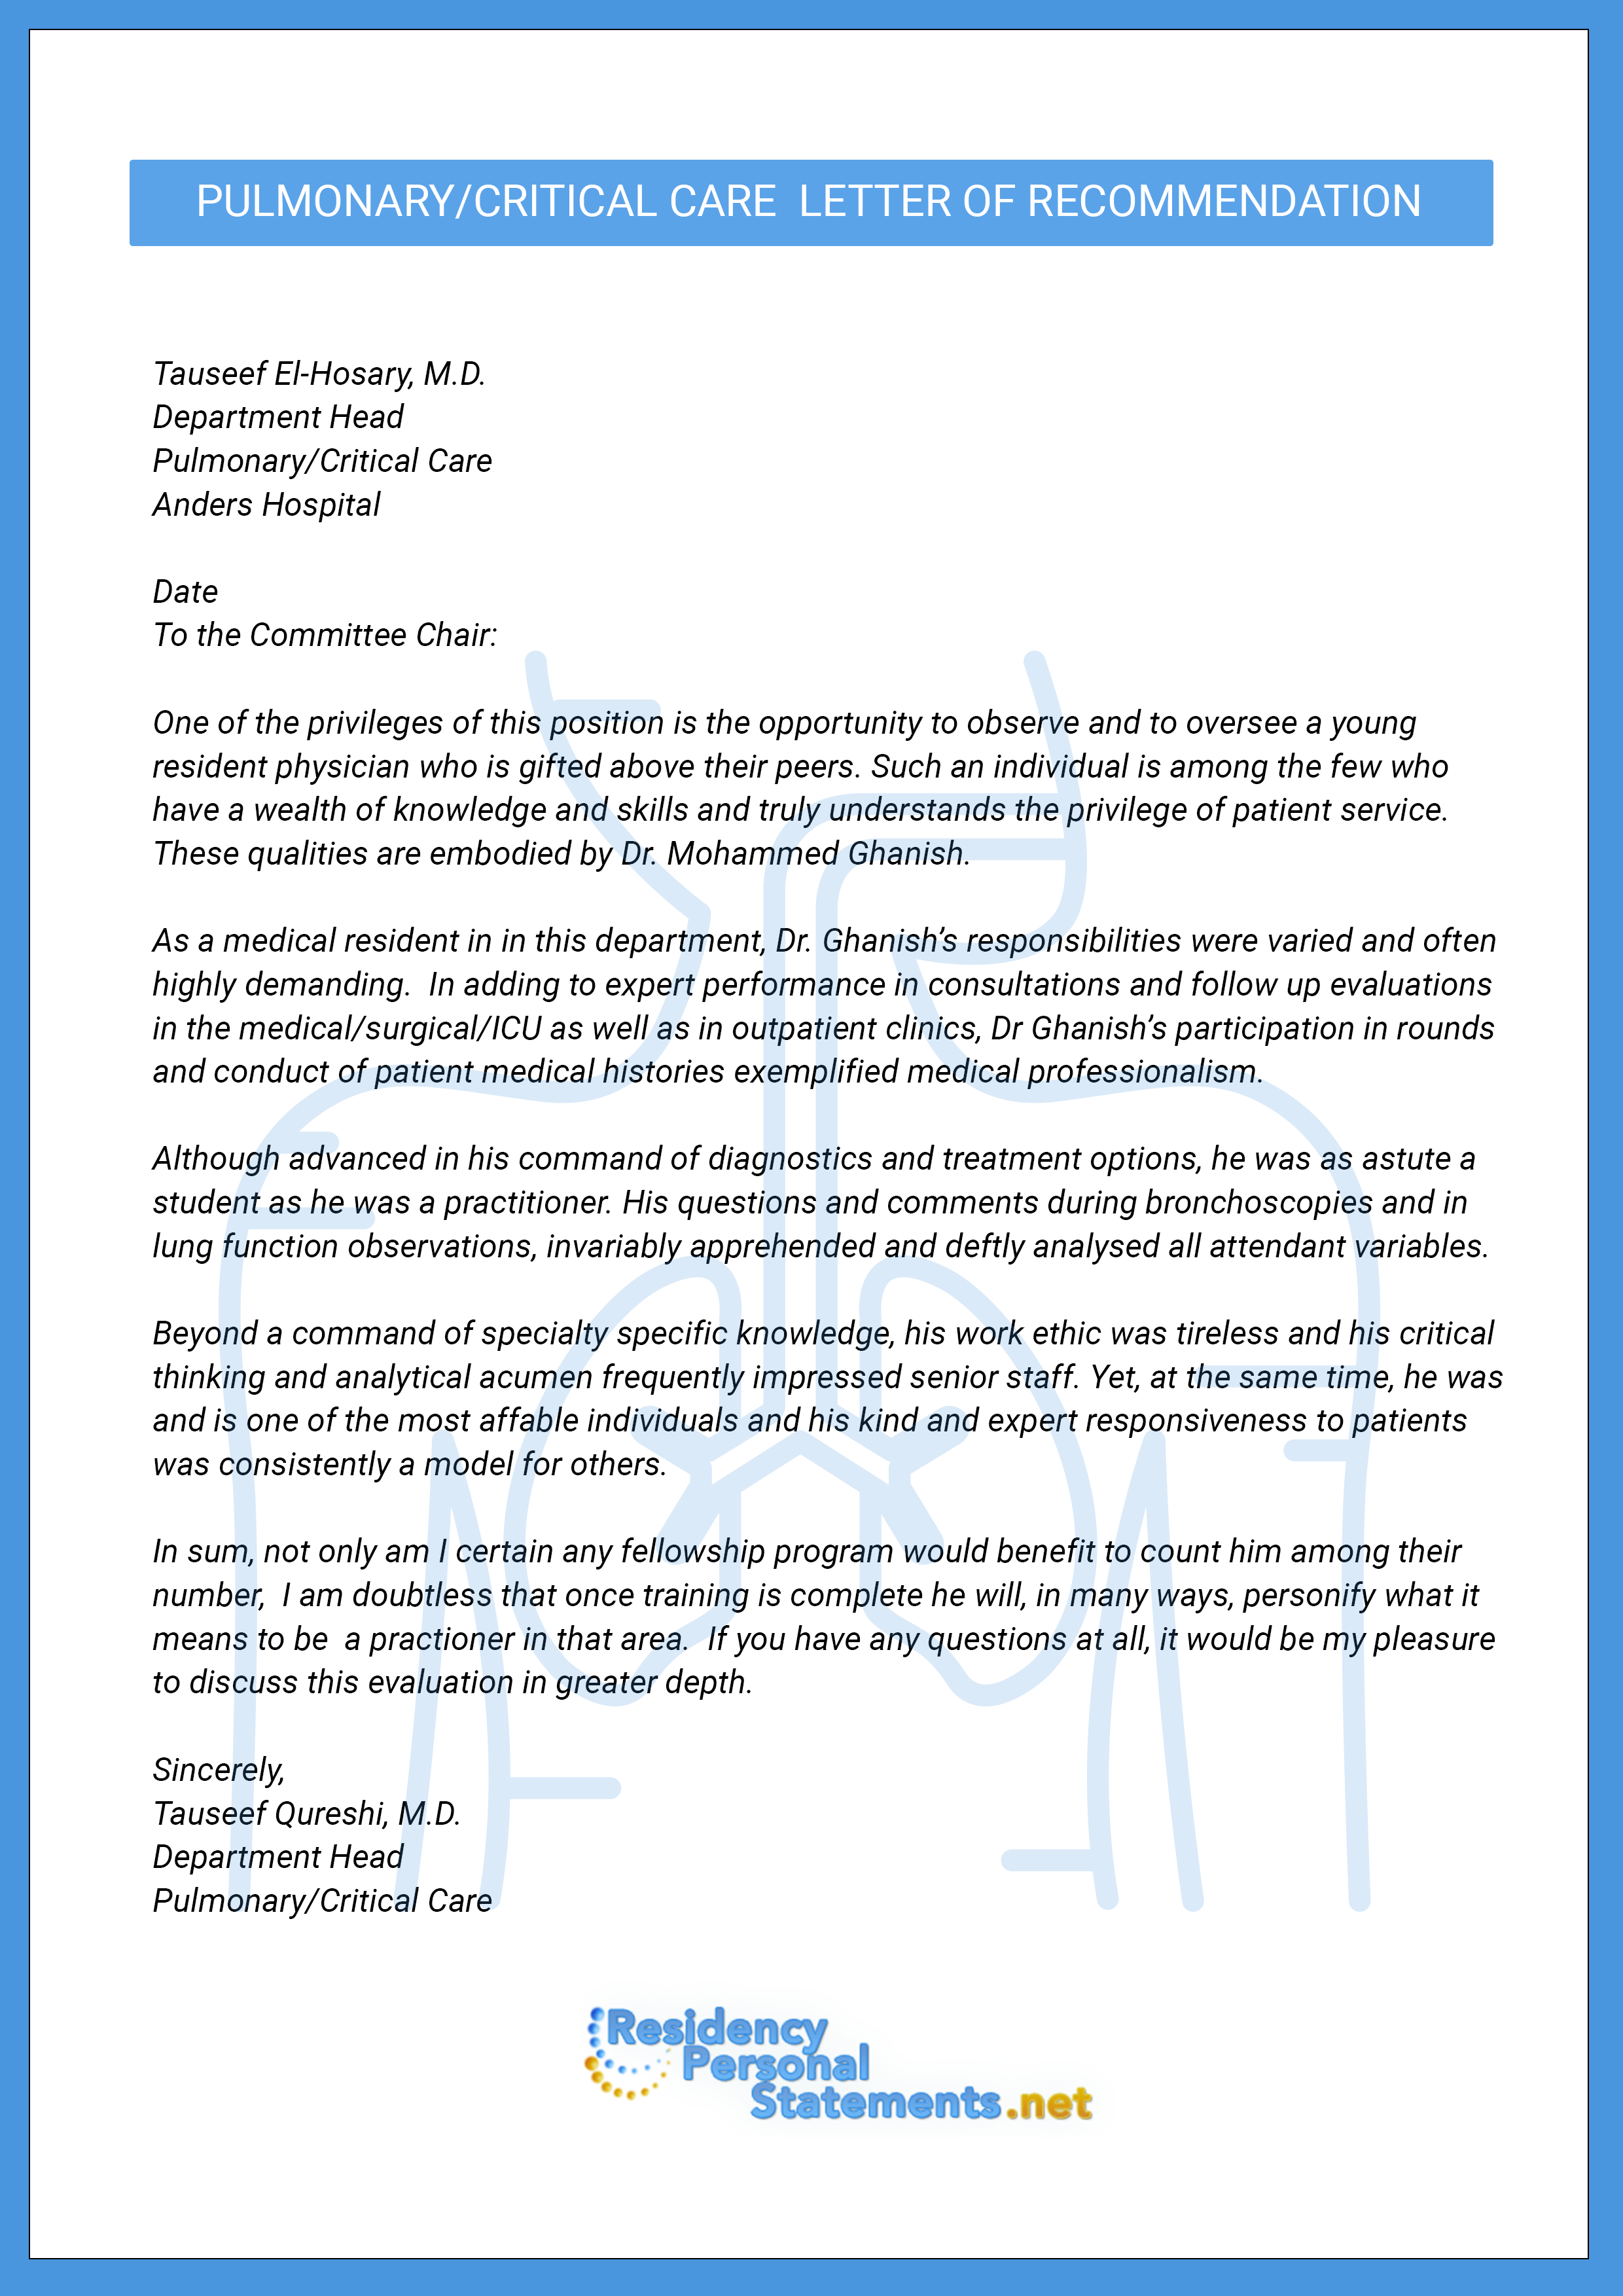 Letter Of Recommendation Request Template from residencypersonalstatements.net